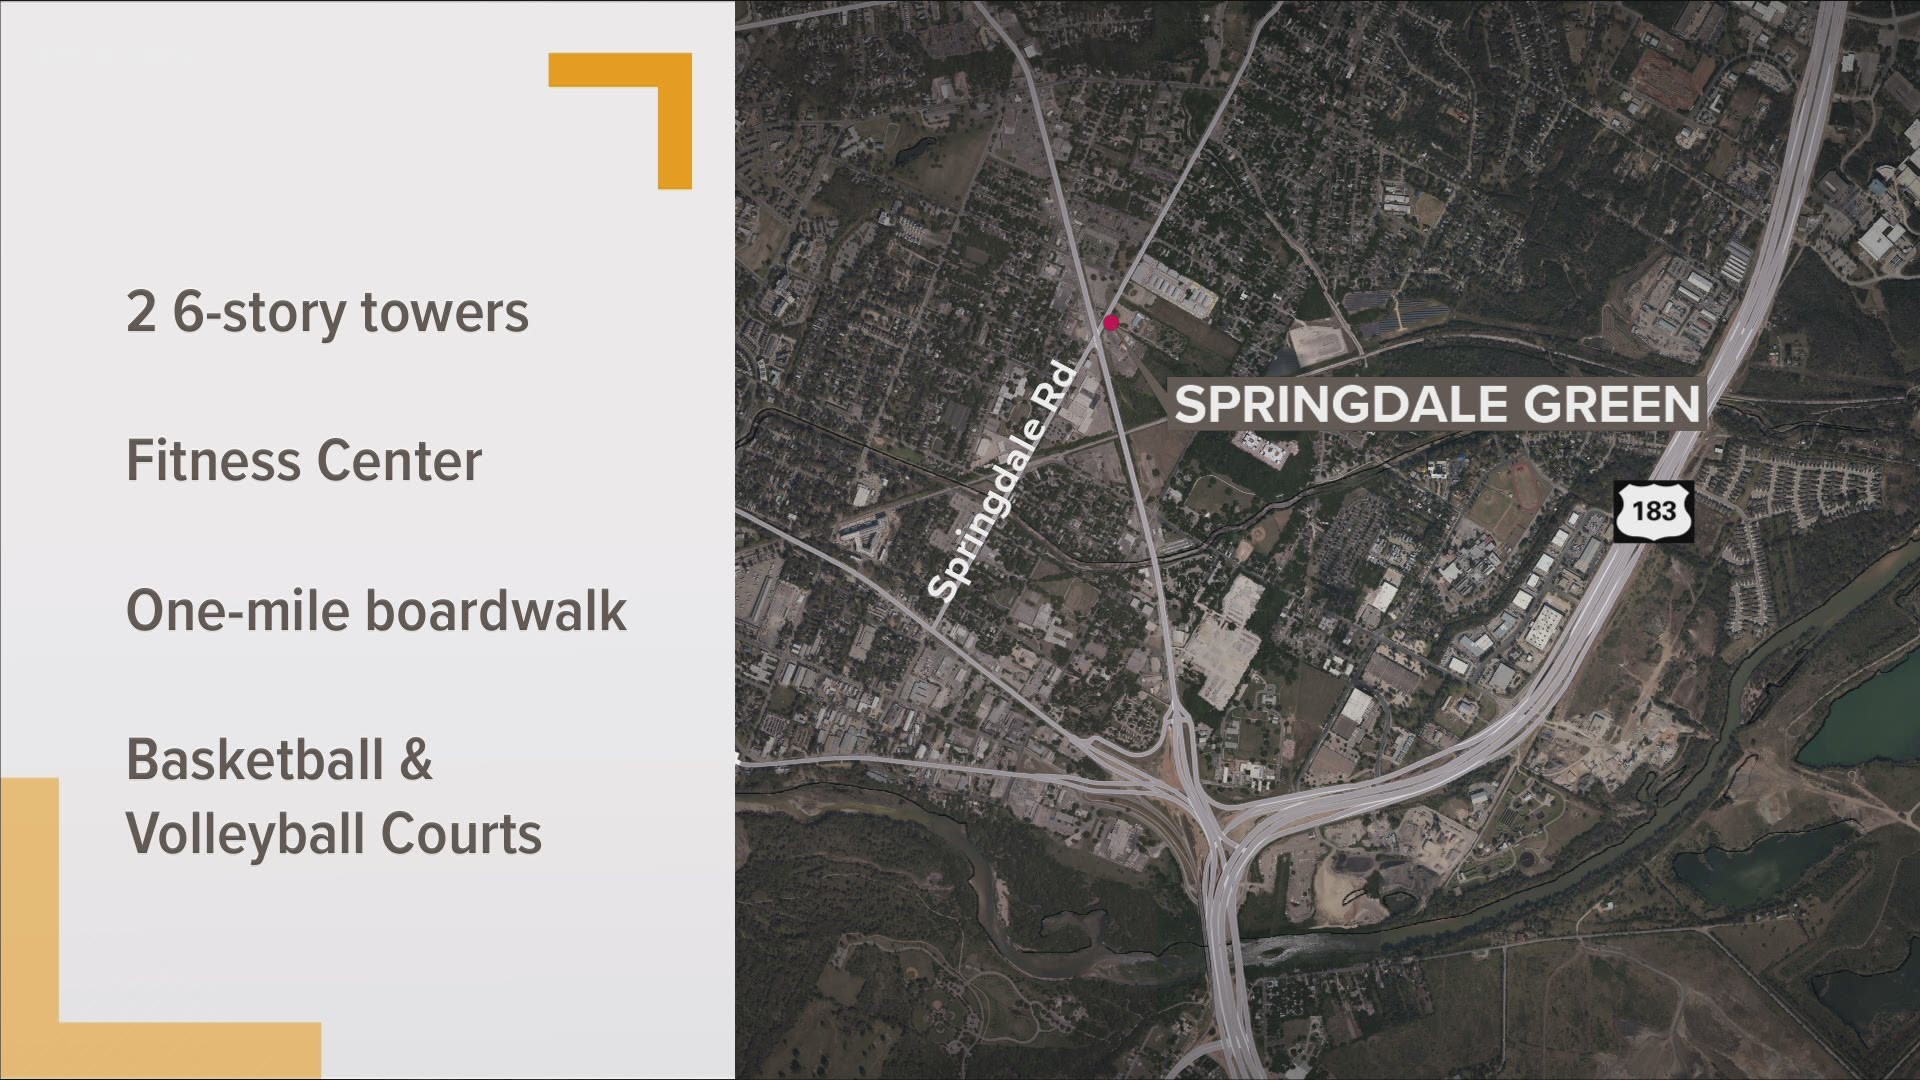 An 872,000-square-foot office park is planned for East Austin. Springdale Green will be located off Springdale Road and Airport Boulevard.